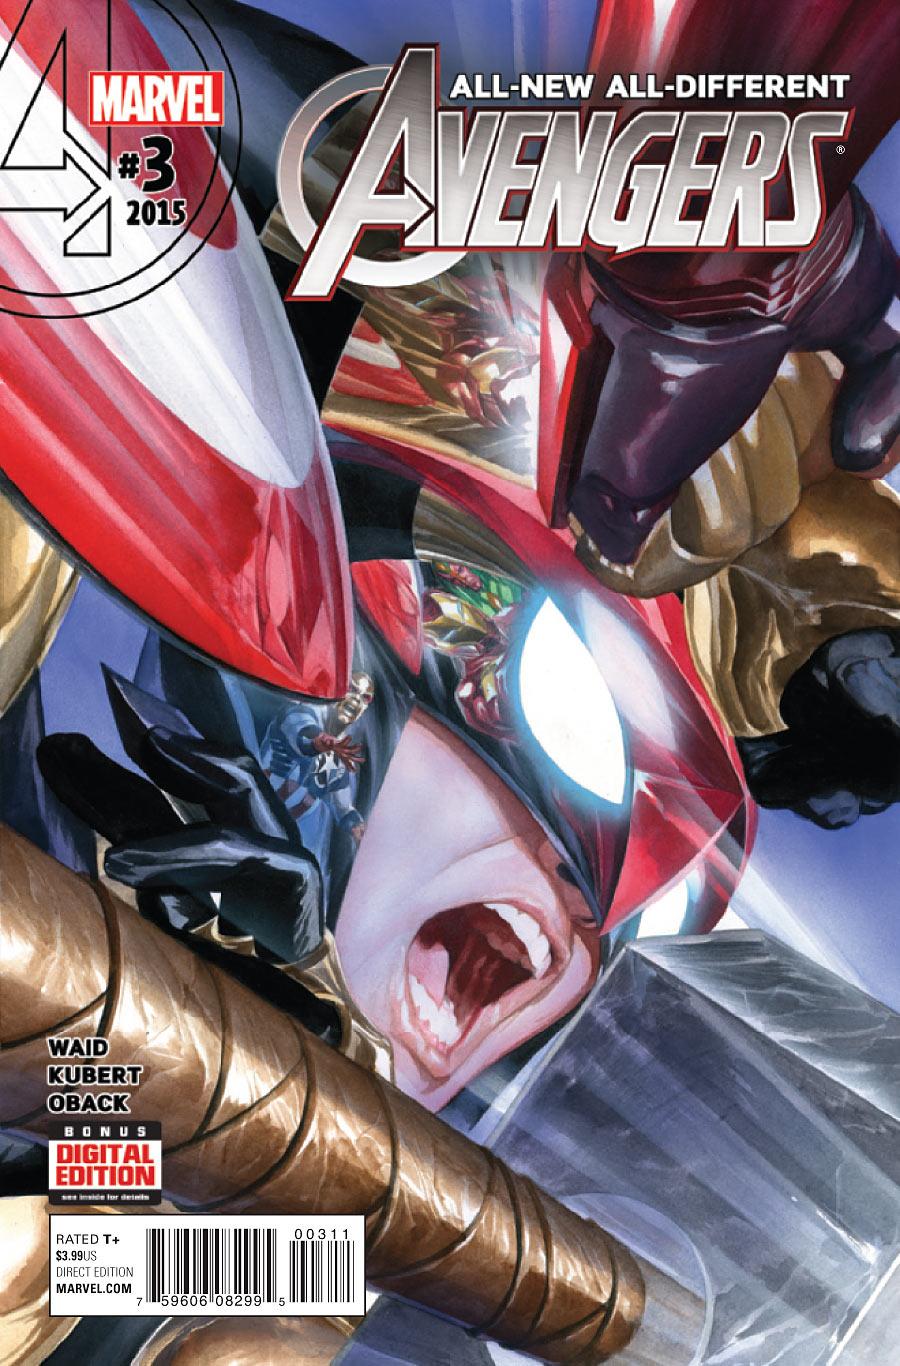 All-New, All-Different Avengers Vol. 1 #3